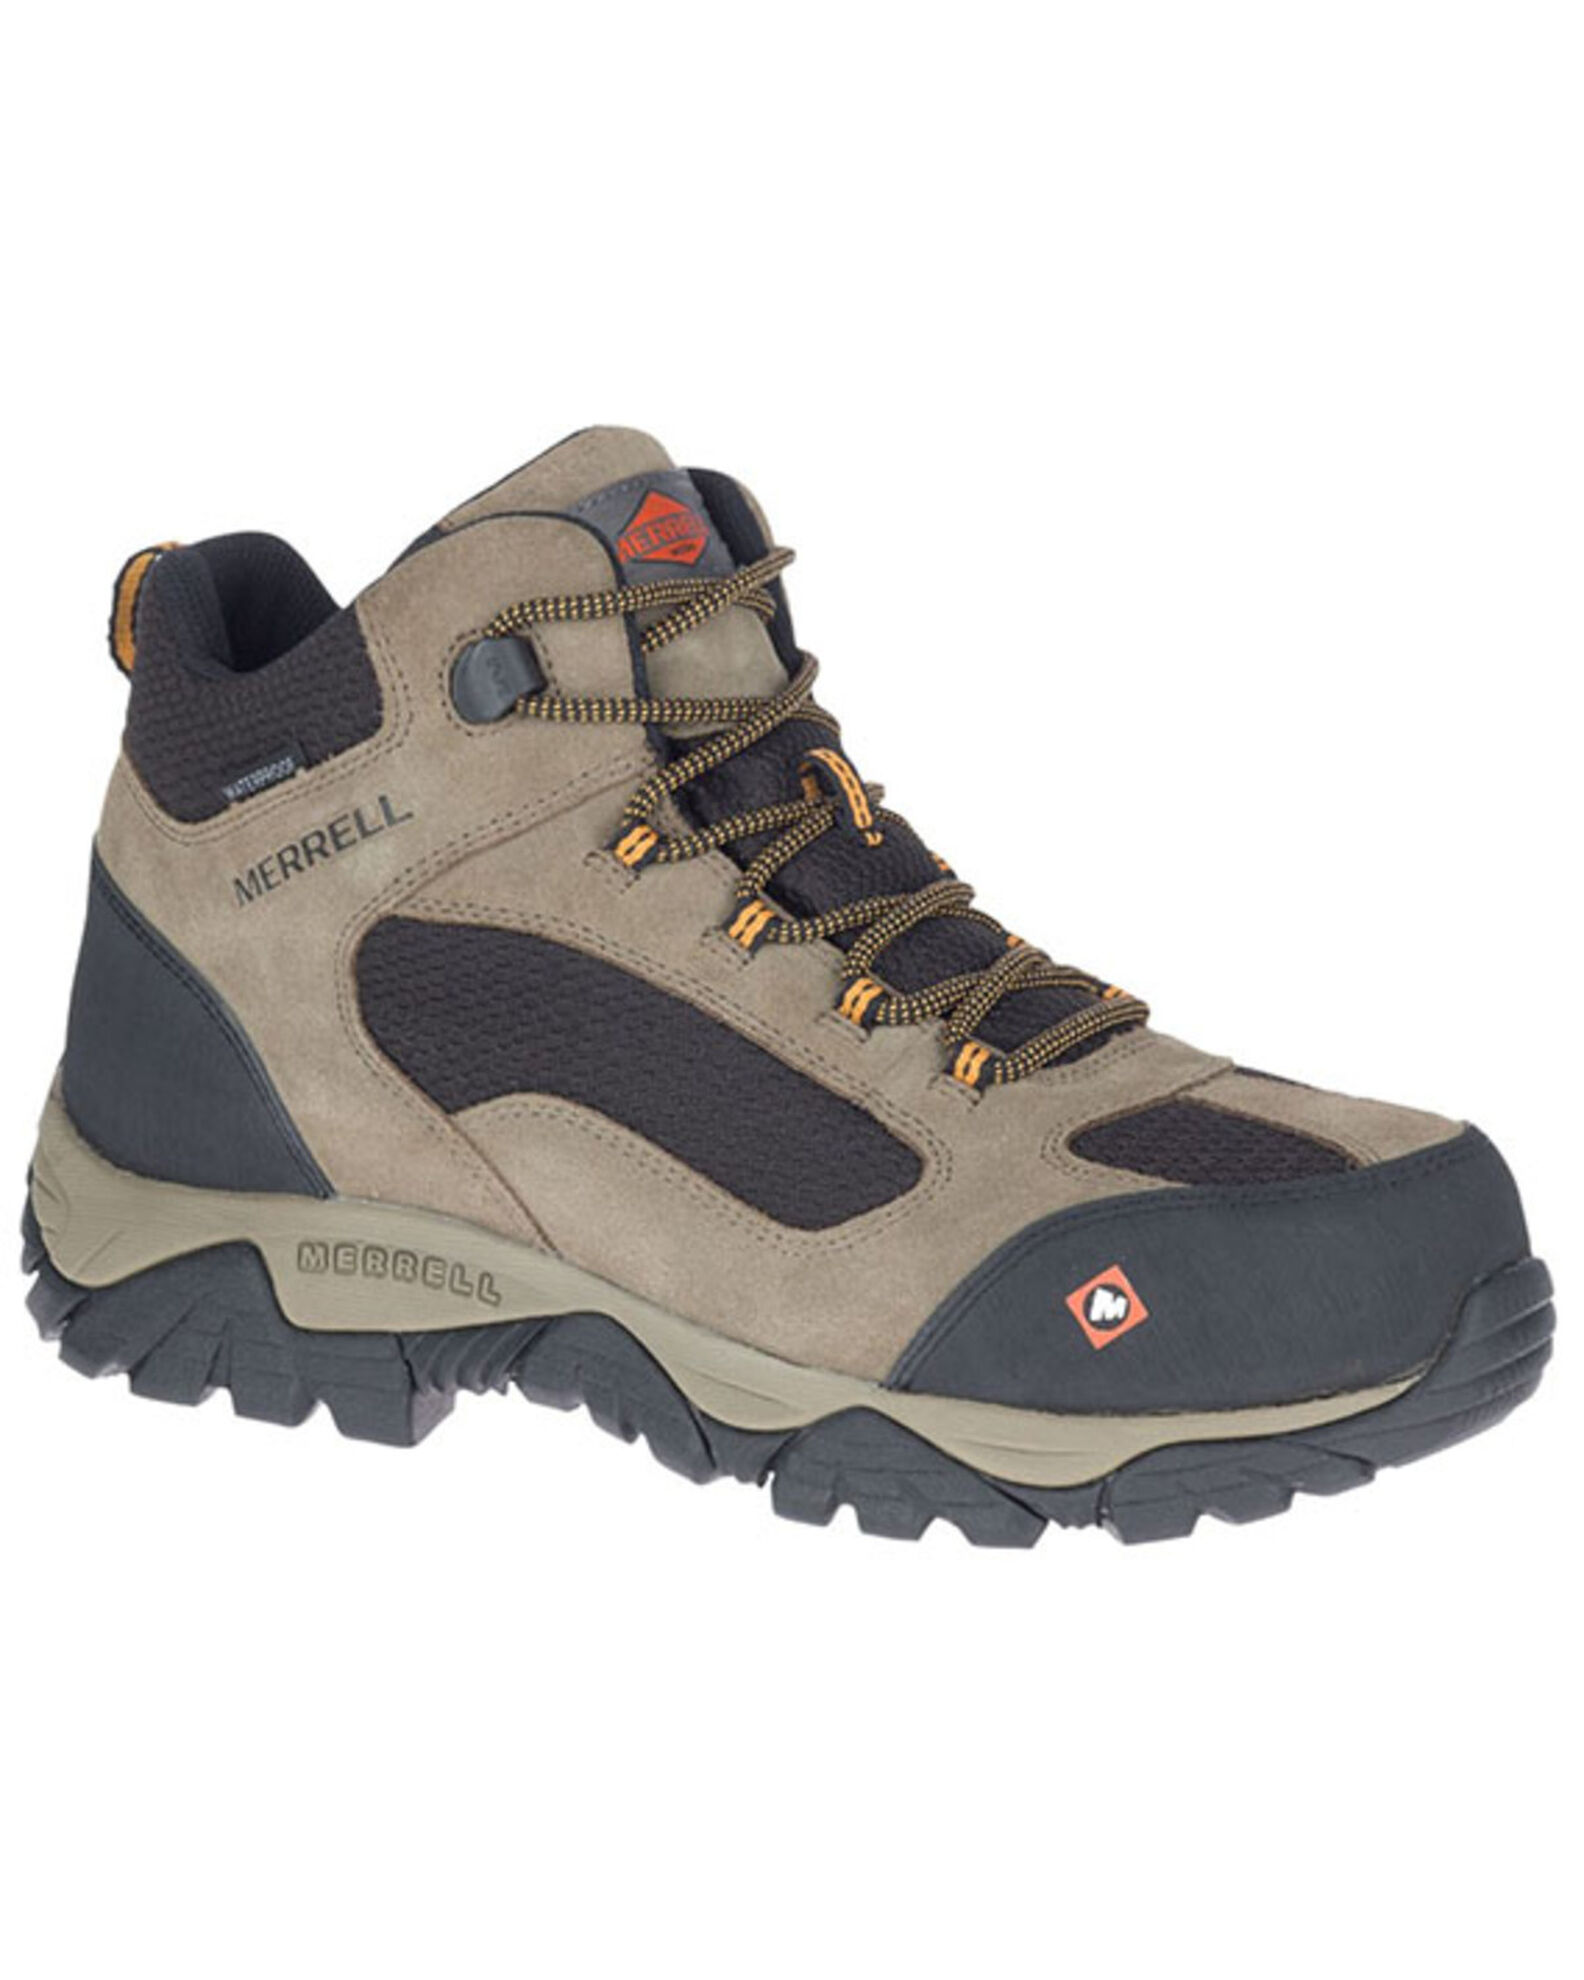 Merrell MOAB Onset Waterproof Boots - Composite | Boot Barn